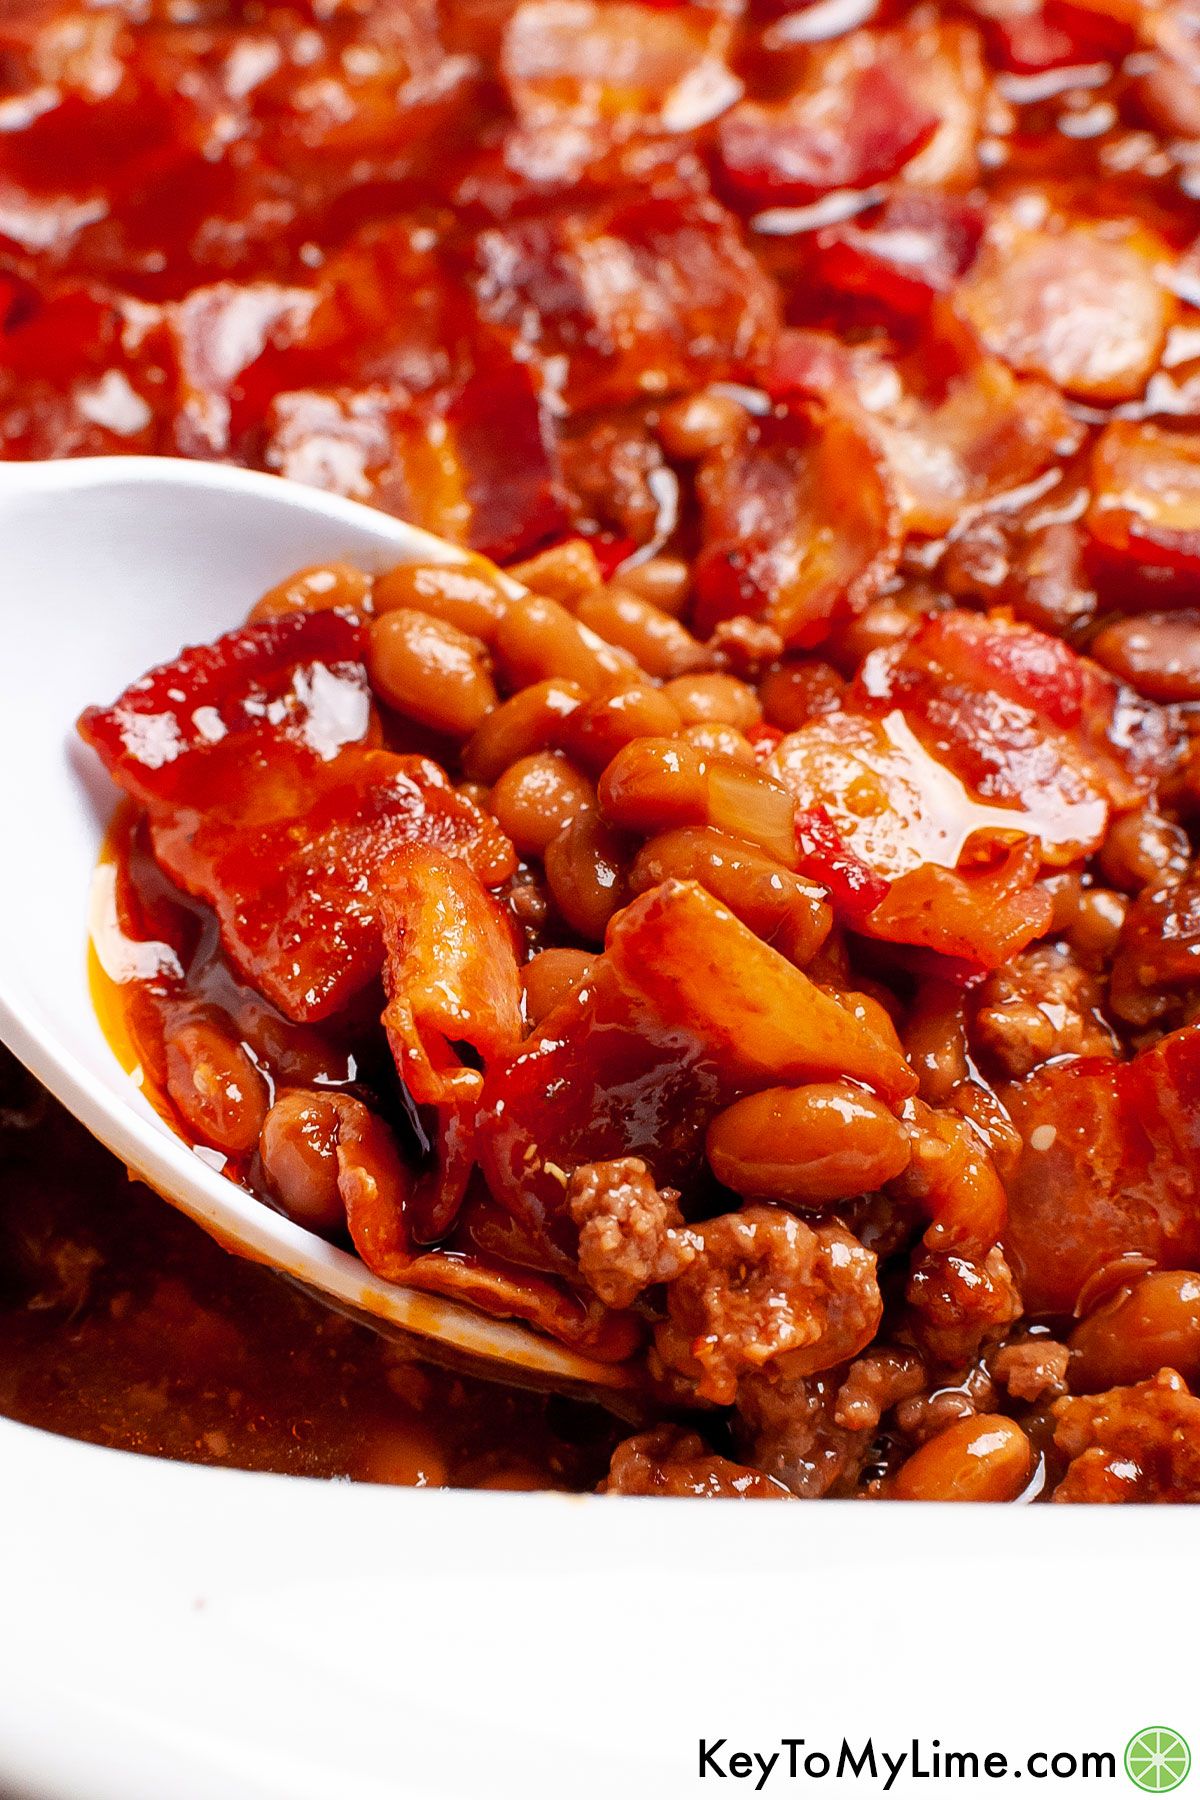 A serving spoon scooping out a portion of baked beans from the casserole dish.